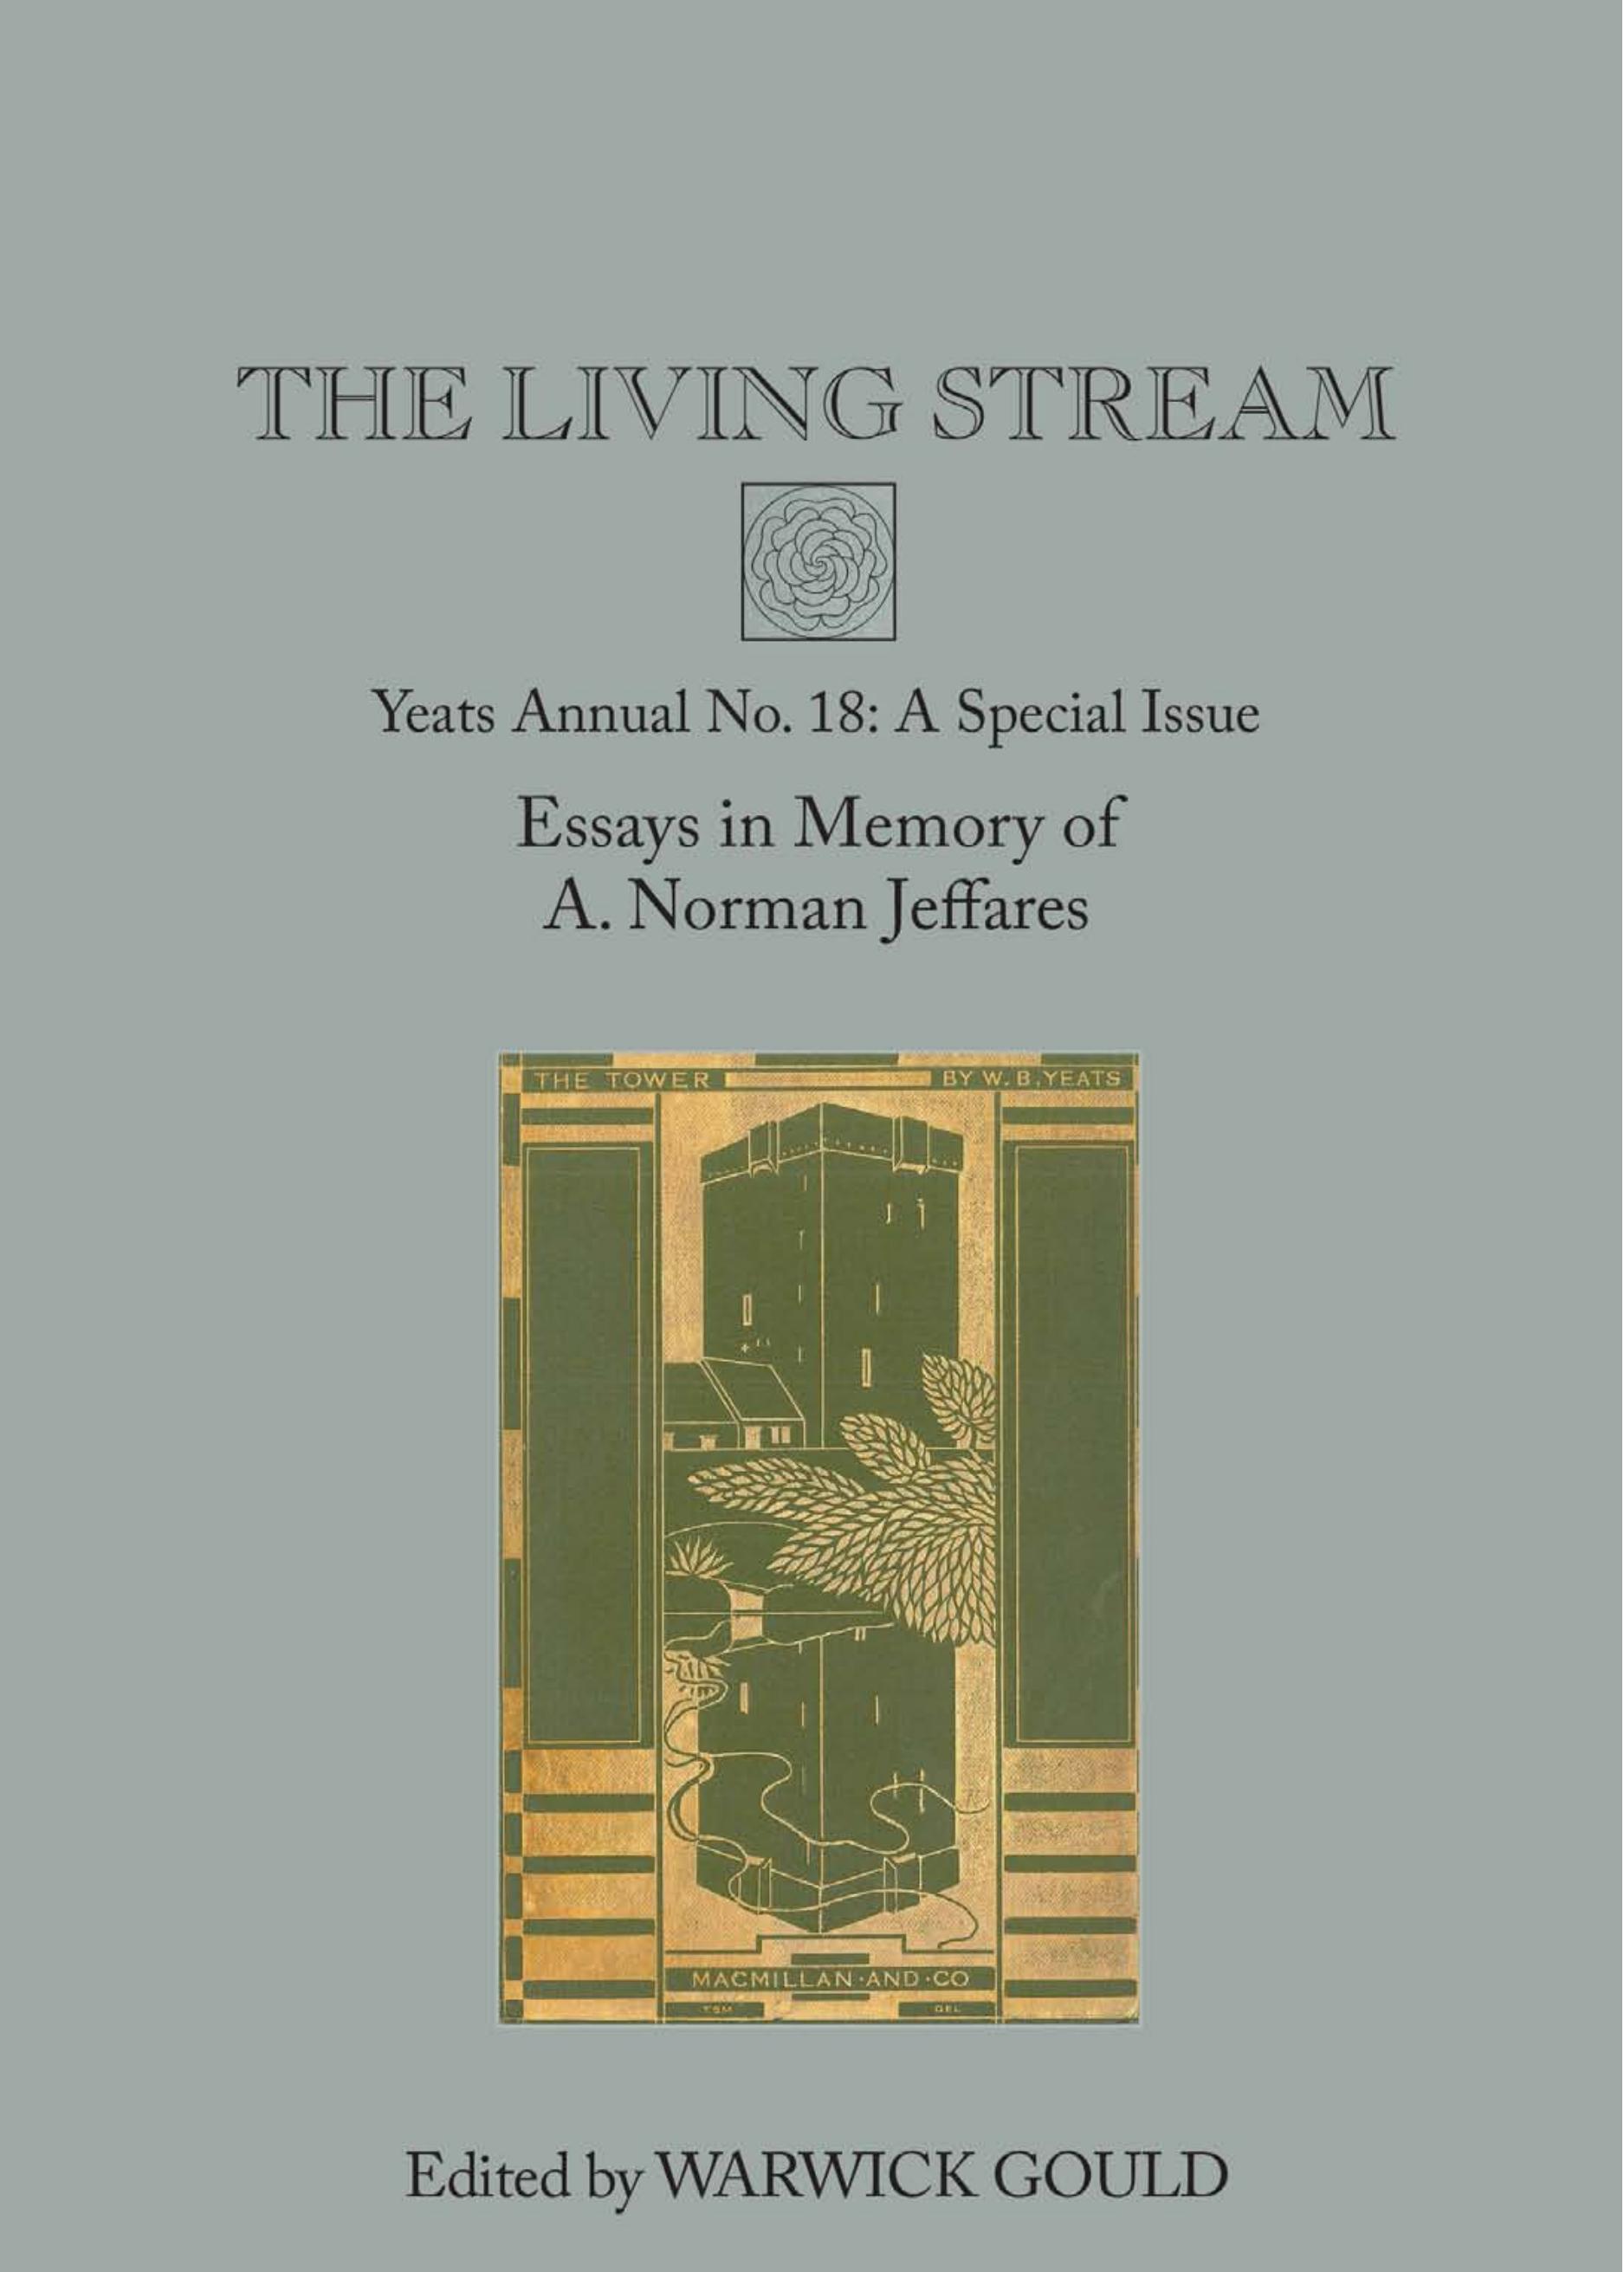 The Living Stream: Yeats Annual No. 18